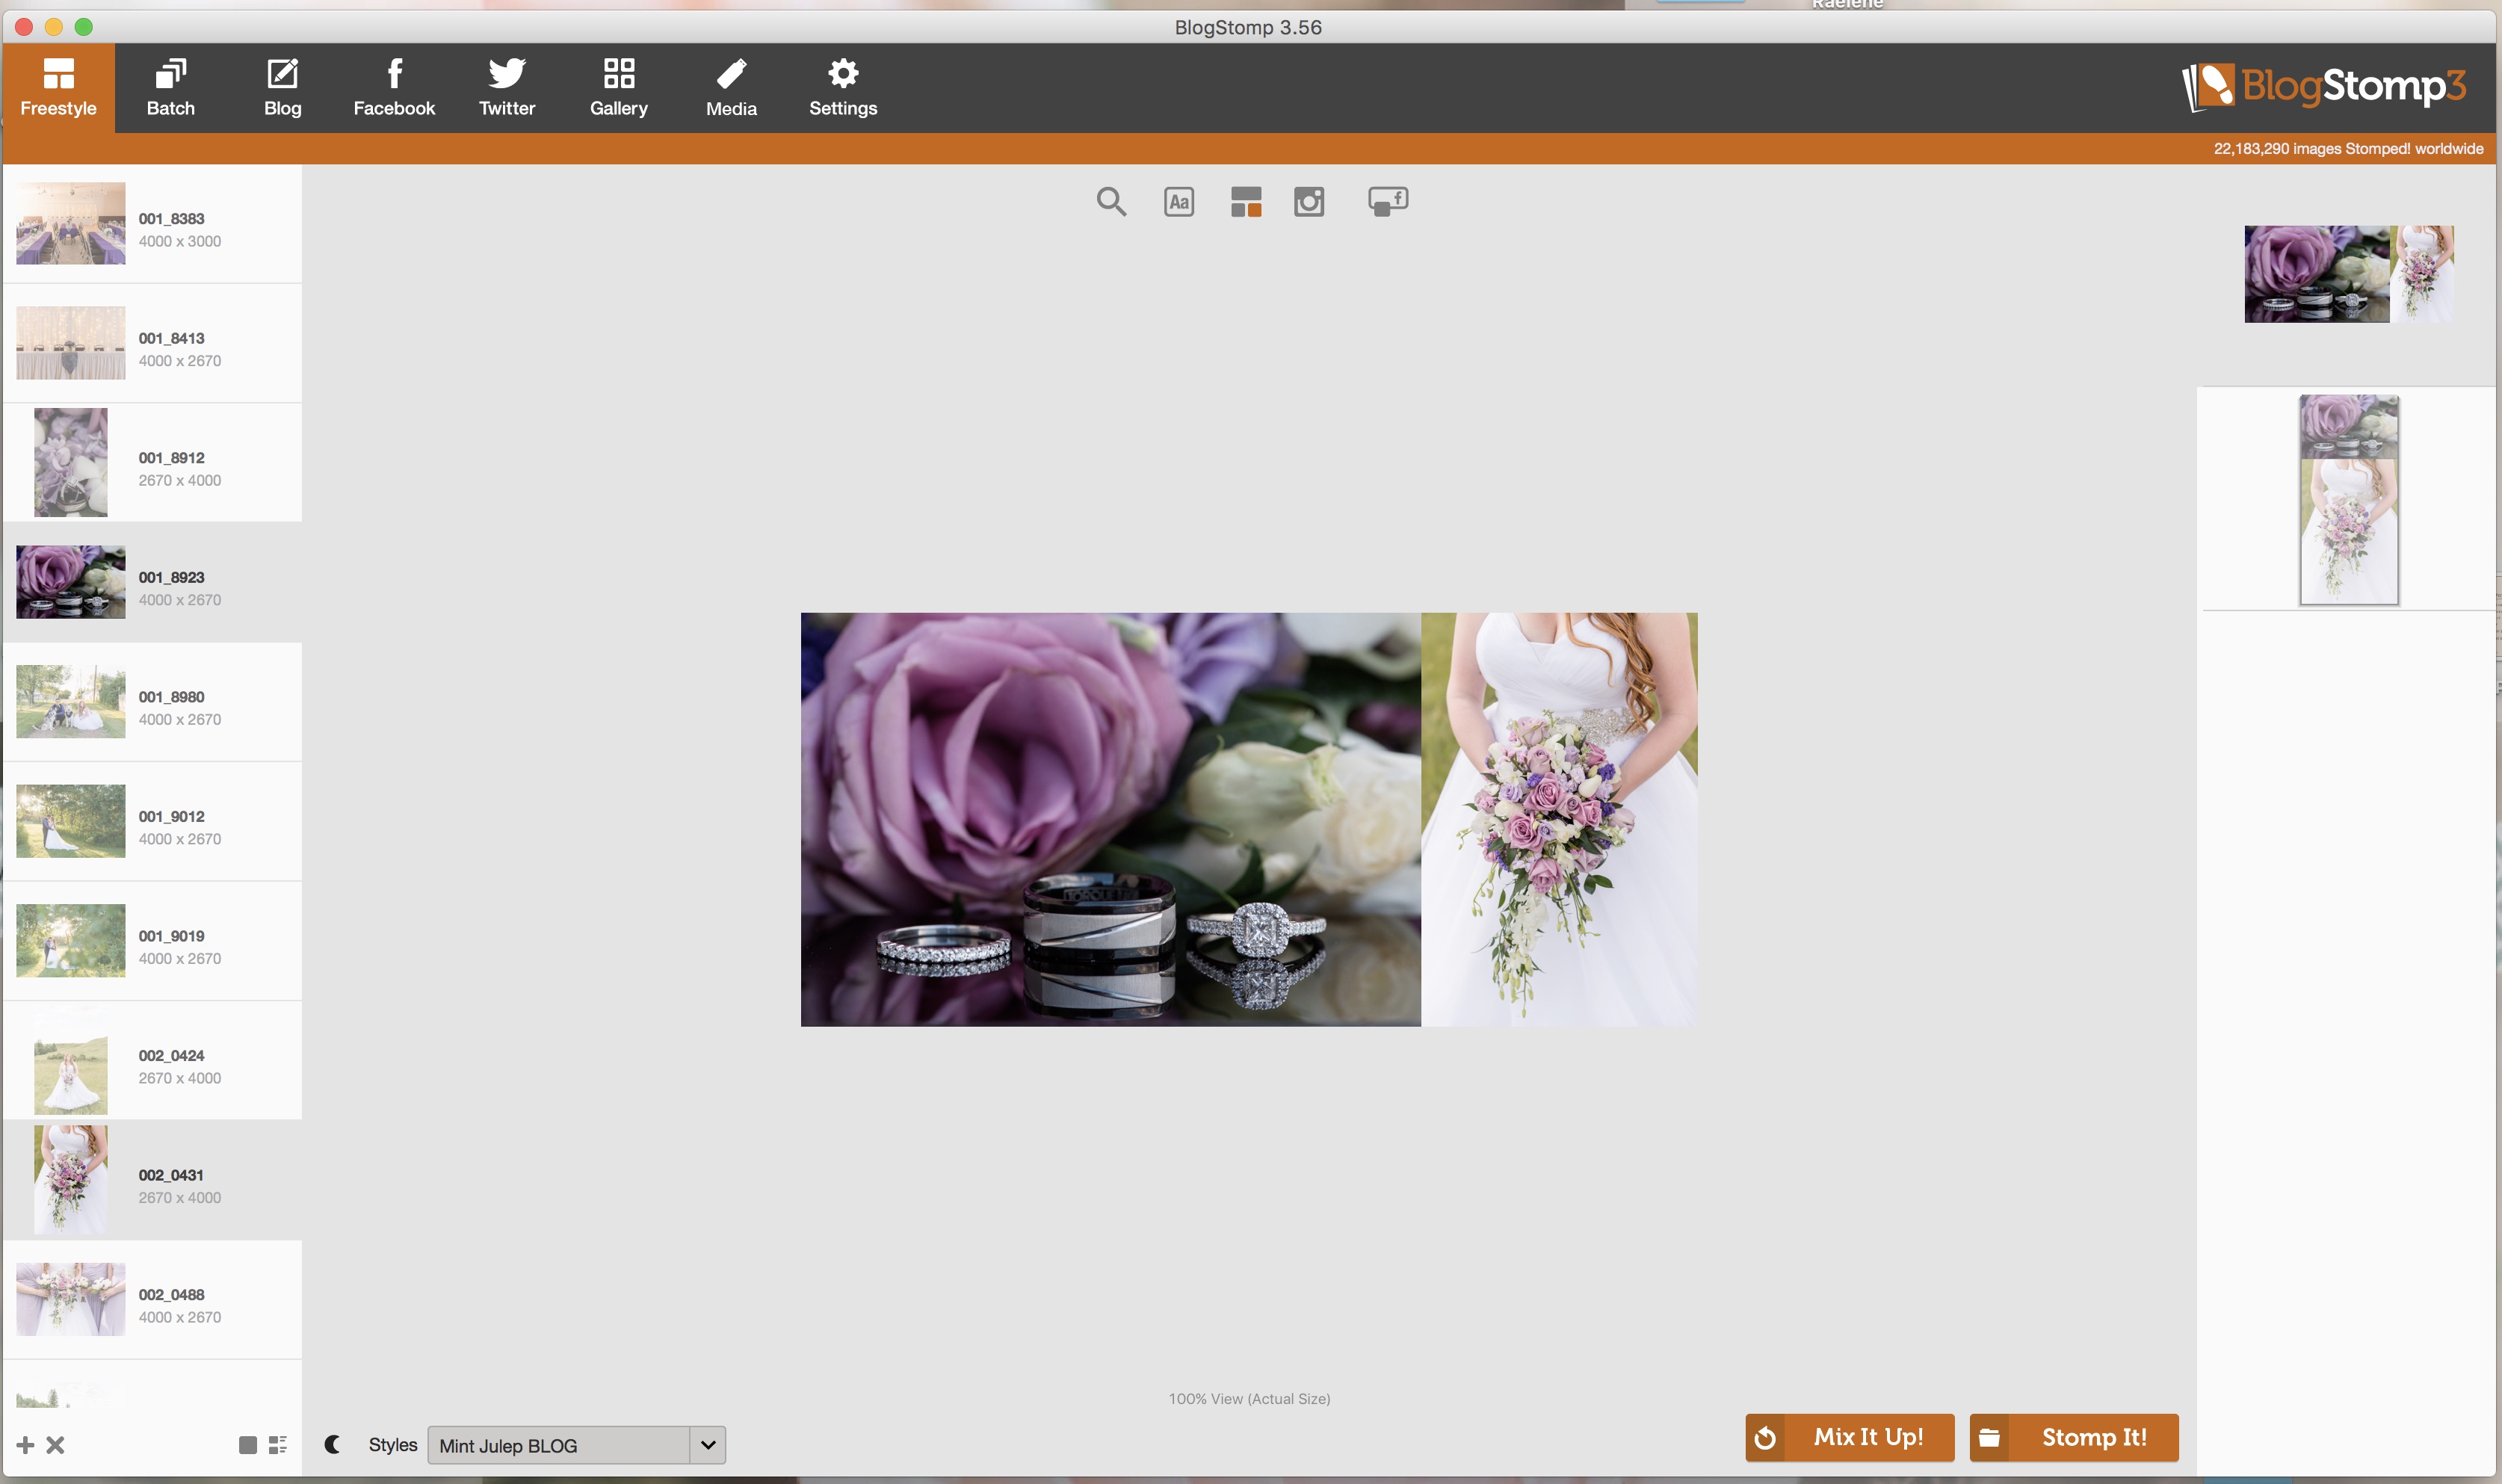 BlogStomp3- How to use BlogStomp in your photography business